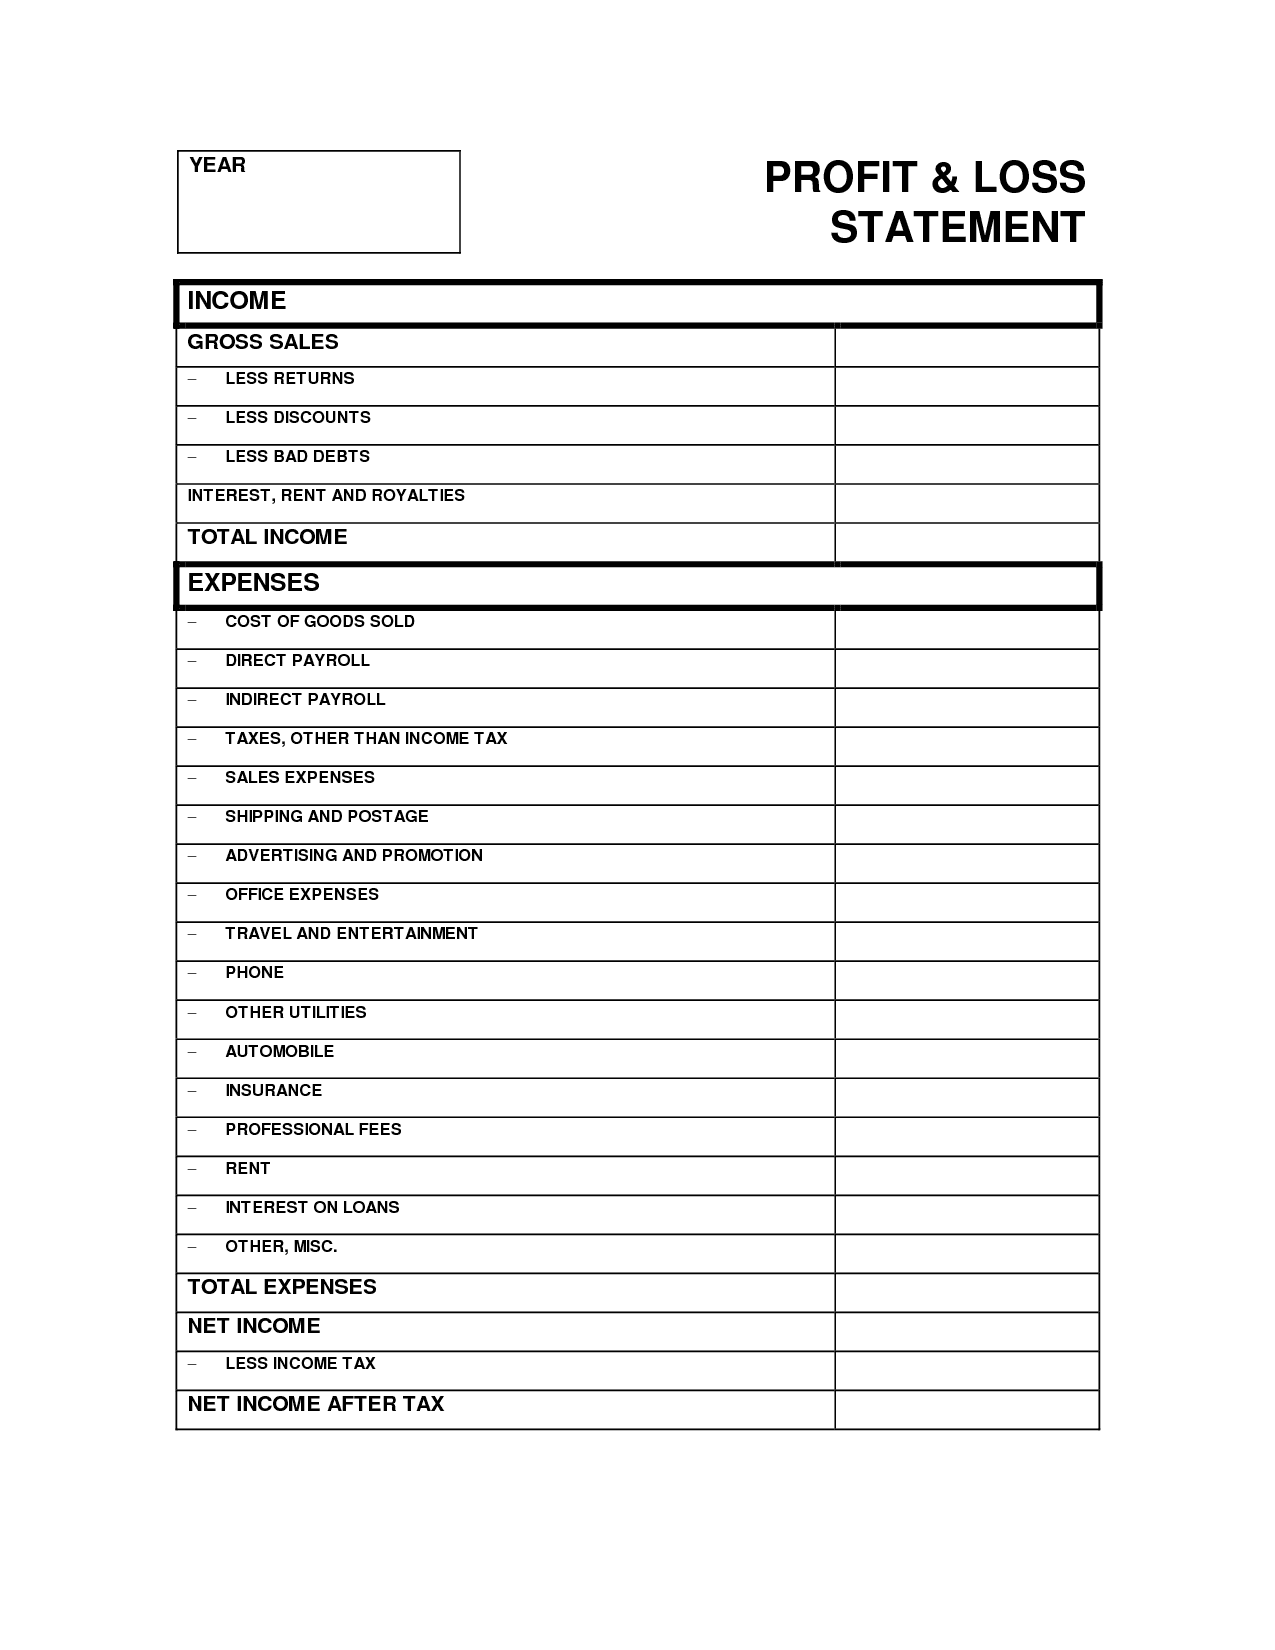 Profit And Loss Statement For Self Employed